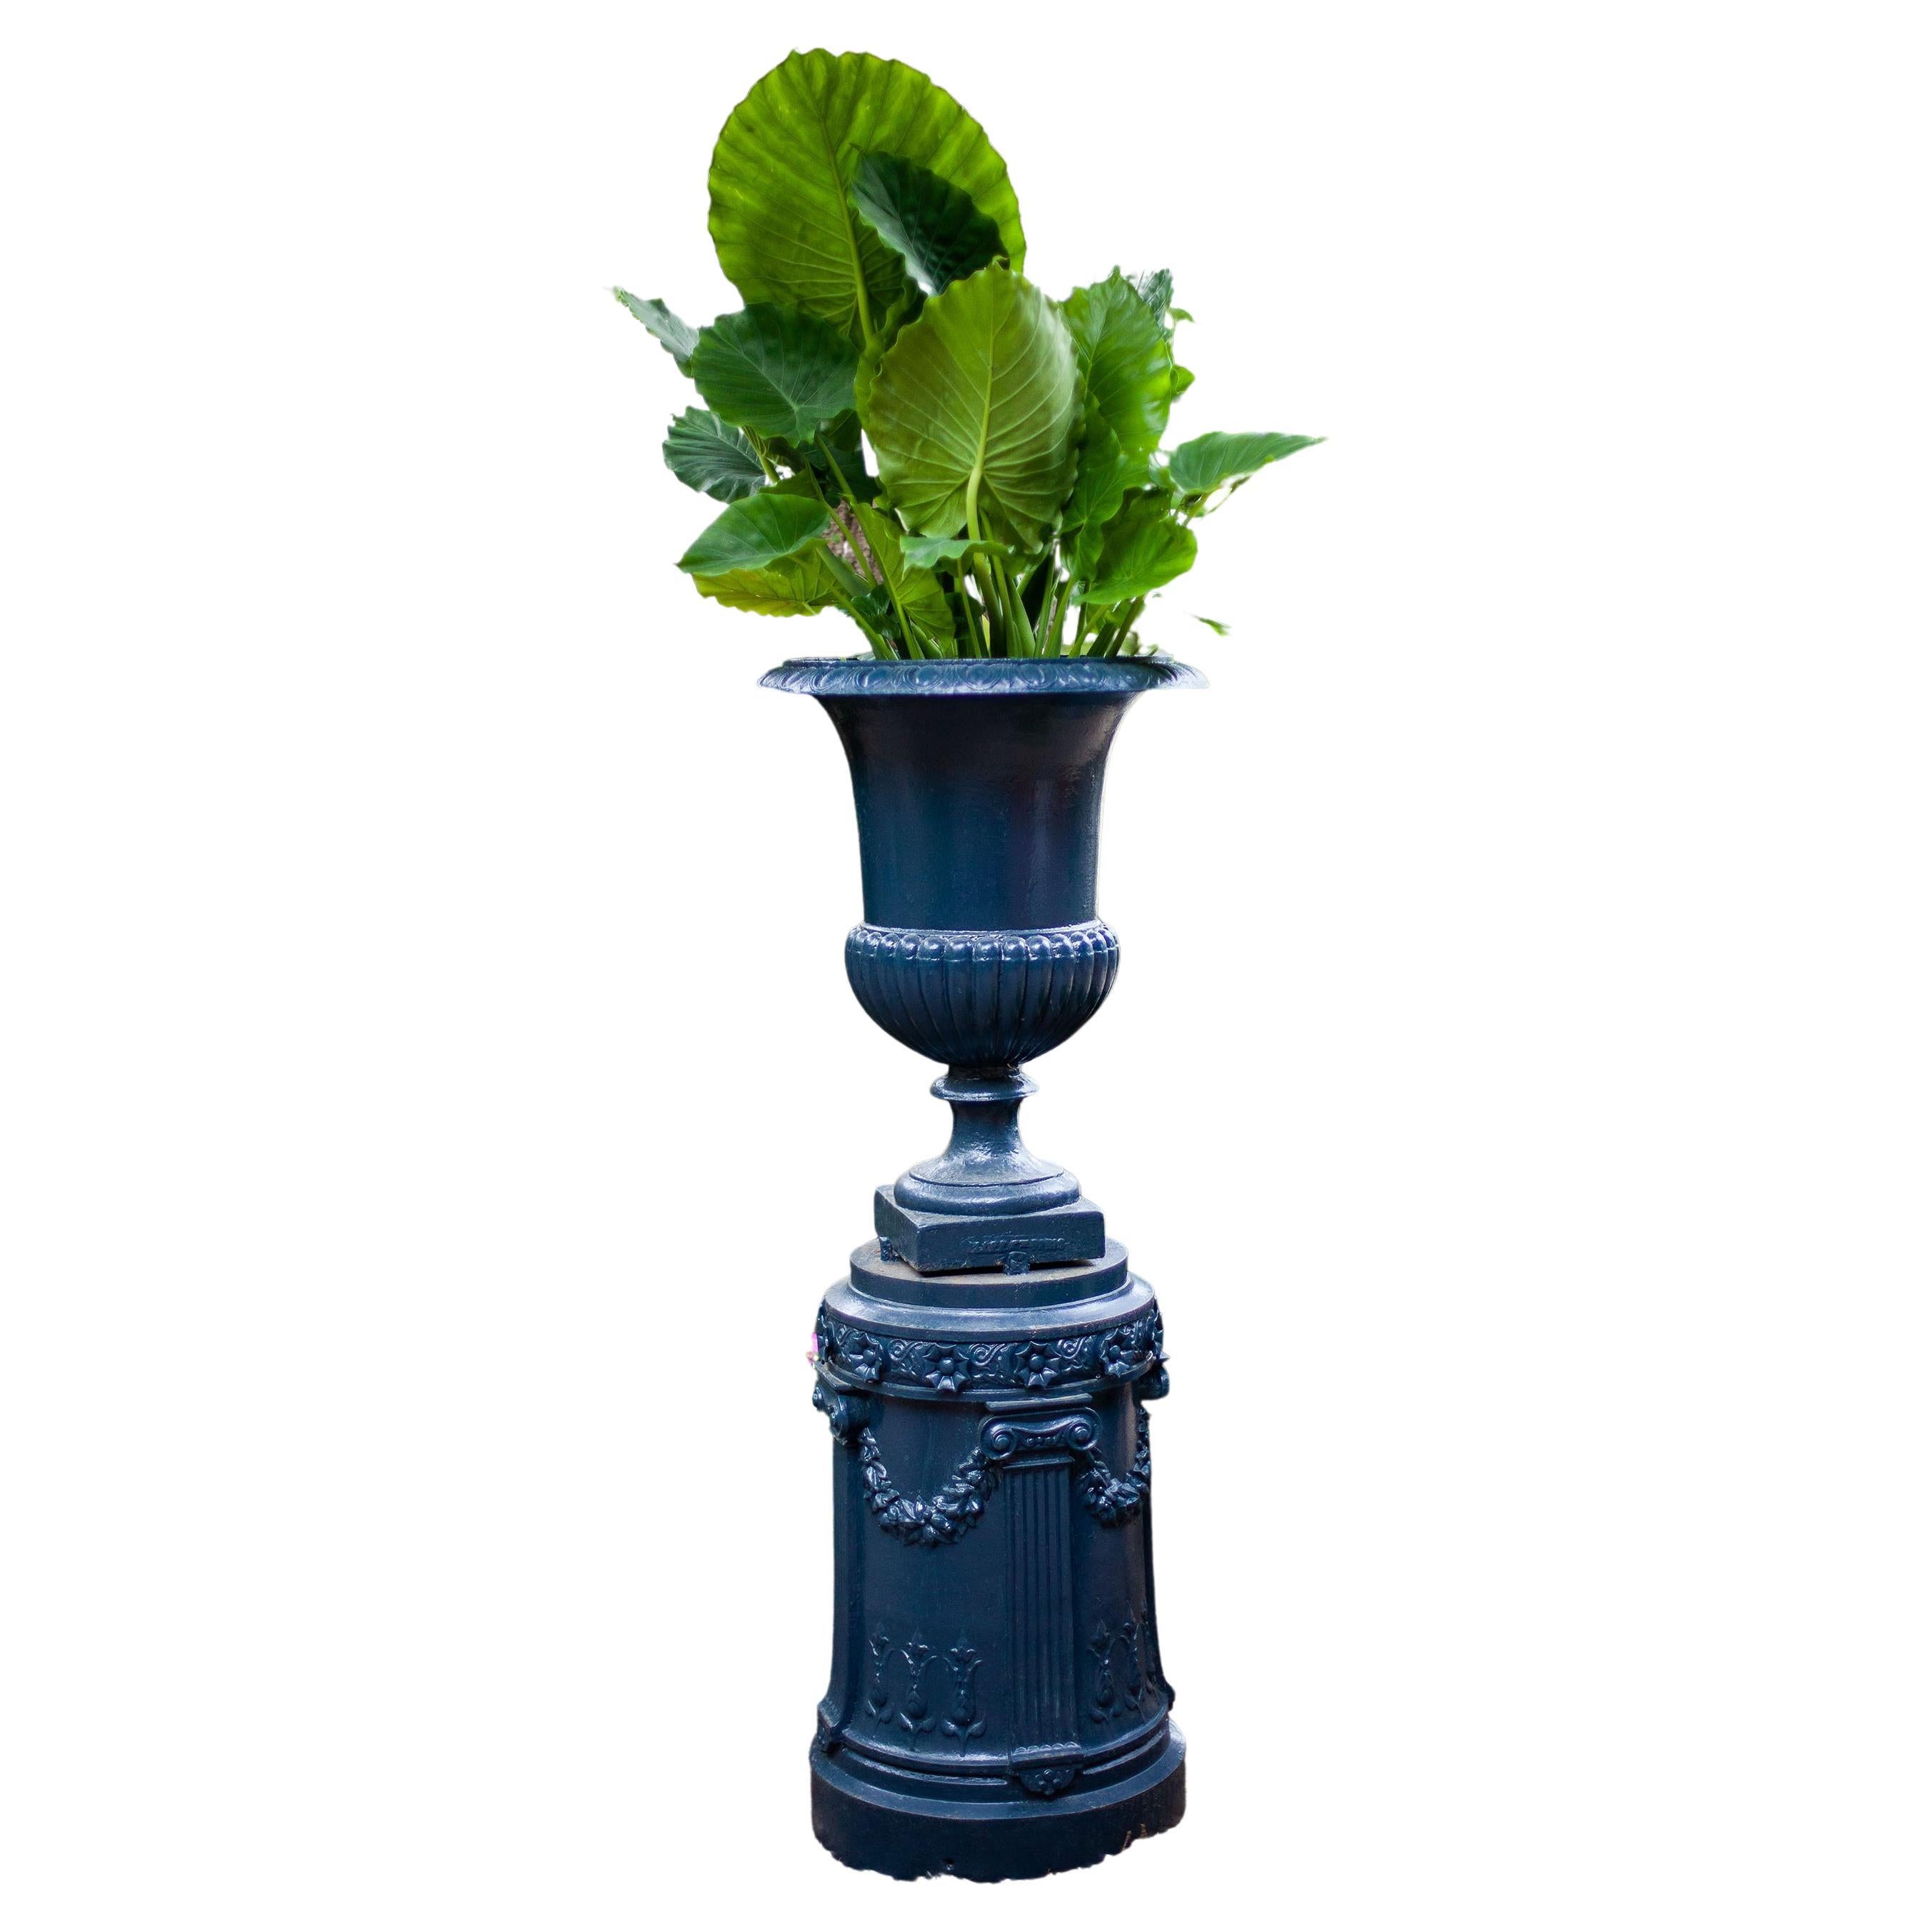 Neo-classical Egg and Dart Vintage Iron Urn on Plinth For Sale